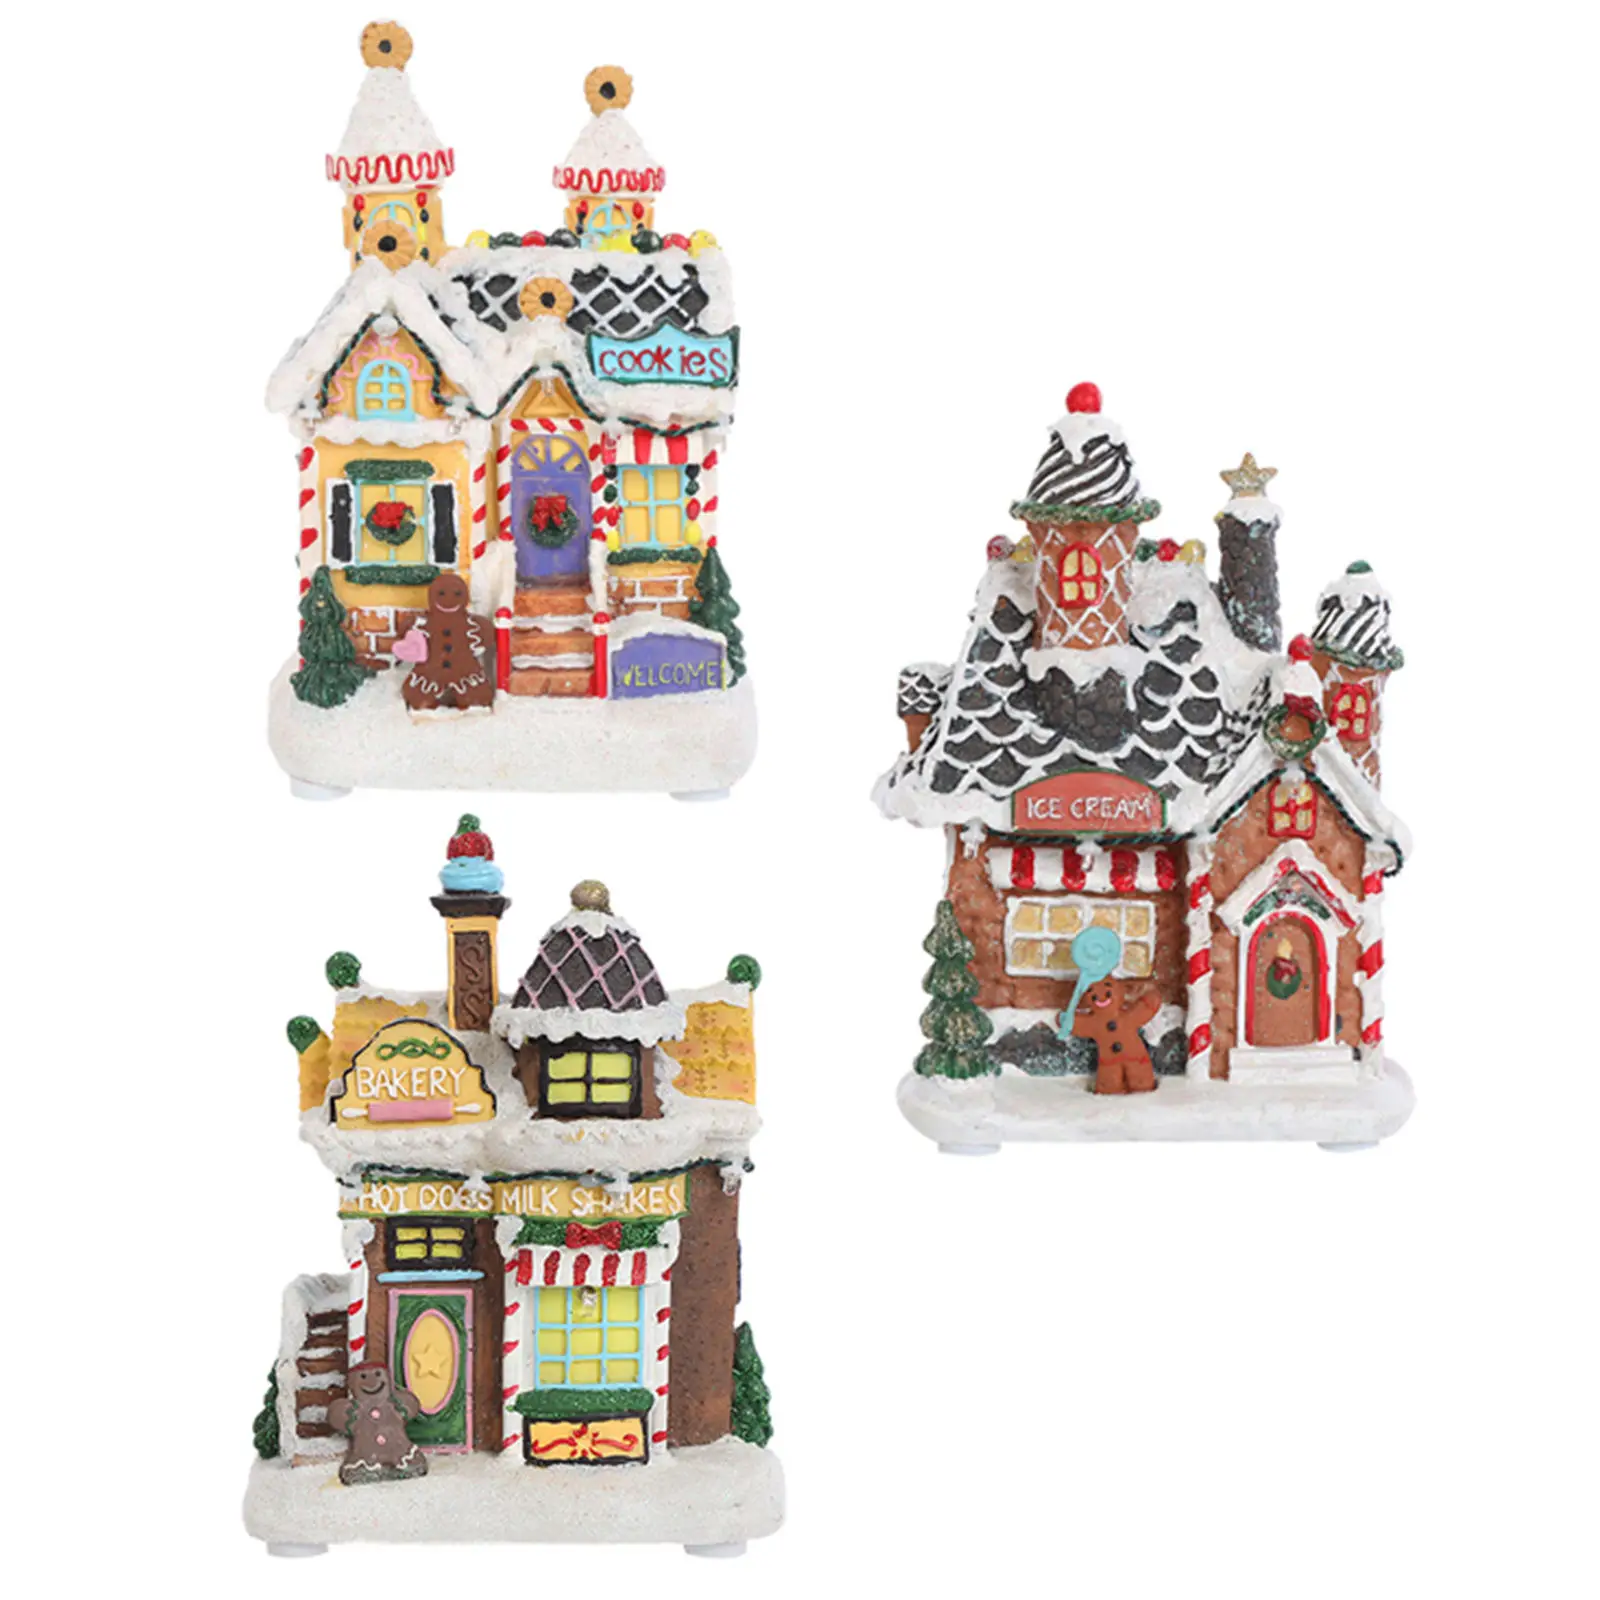 Creative Snow Scene House Ornaments Snow Scene Village Houses Building Holiday Hand-Painted LED Light Up Durable for Tabletop